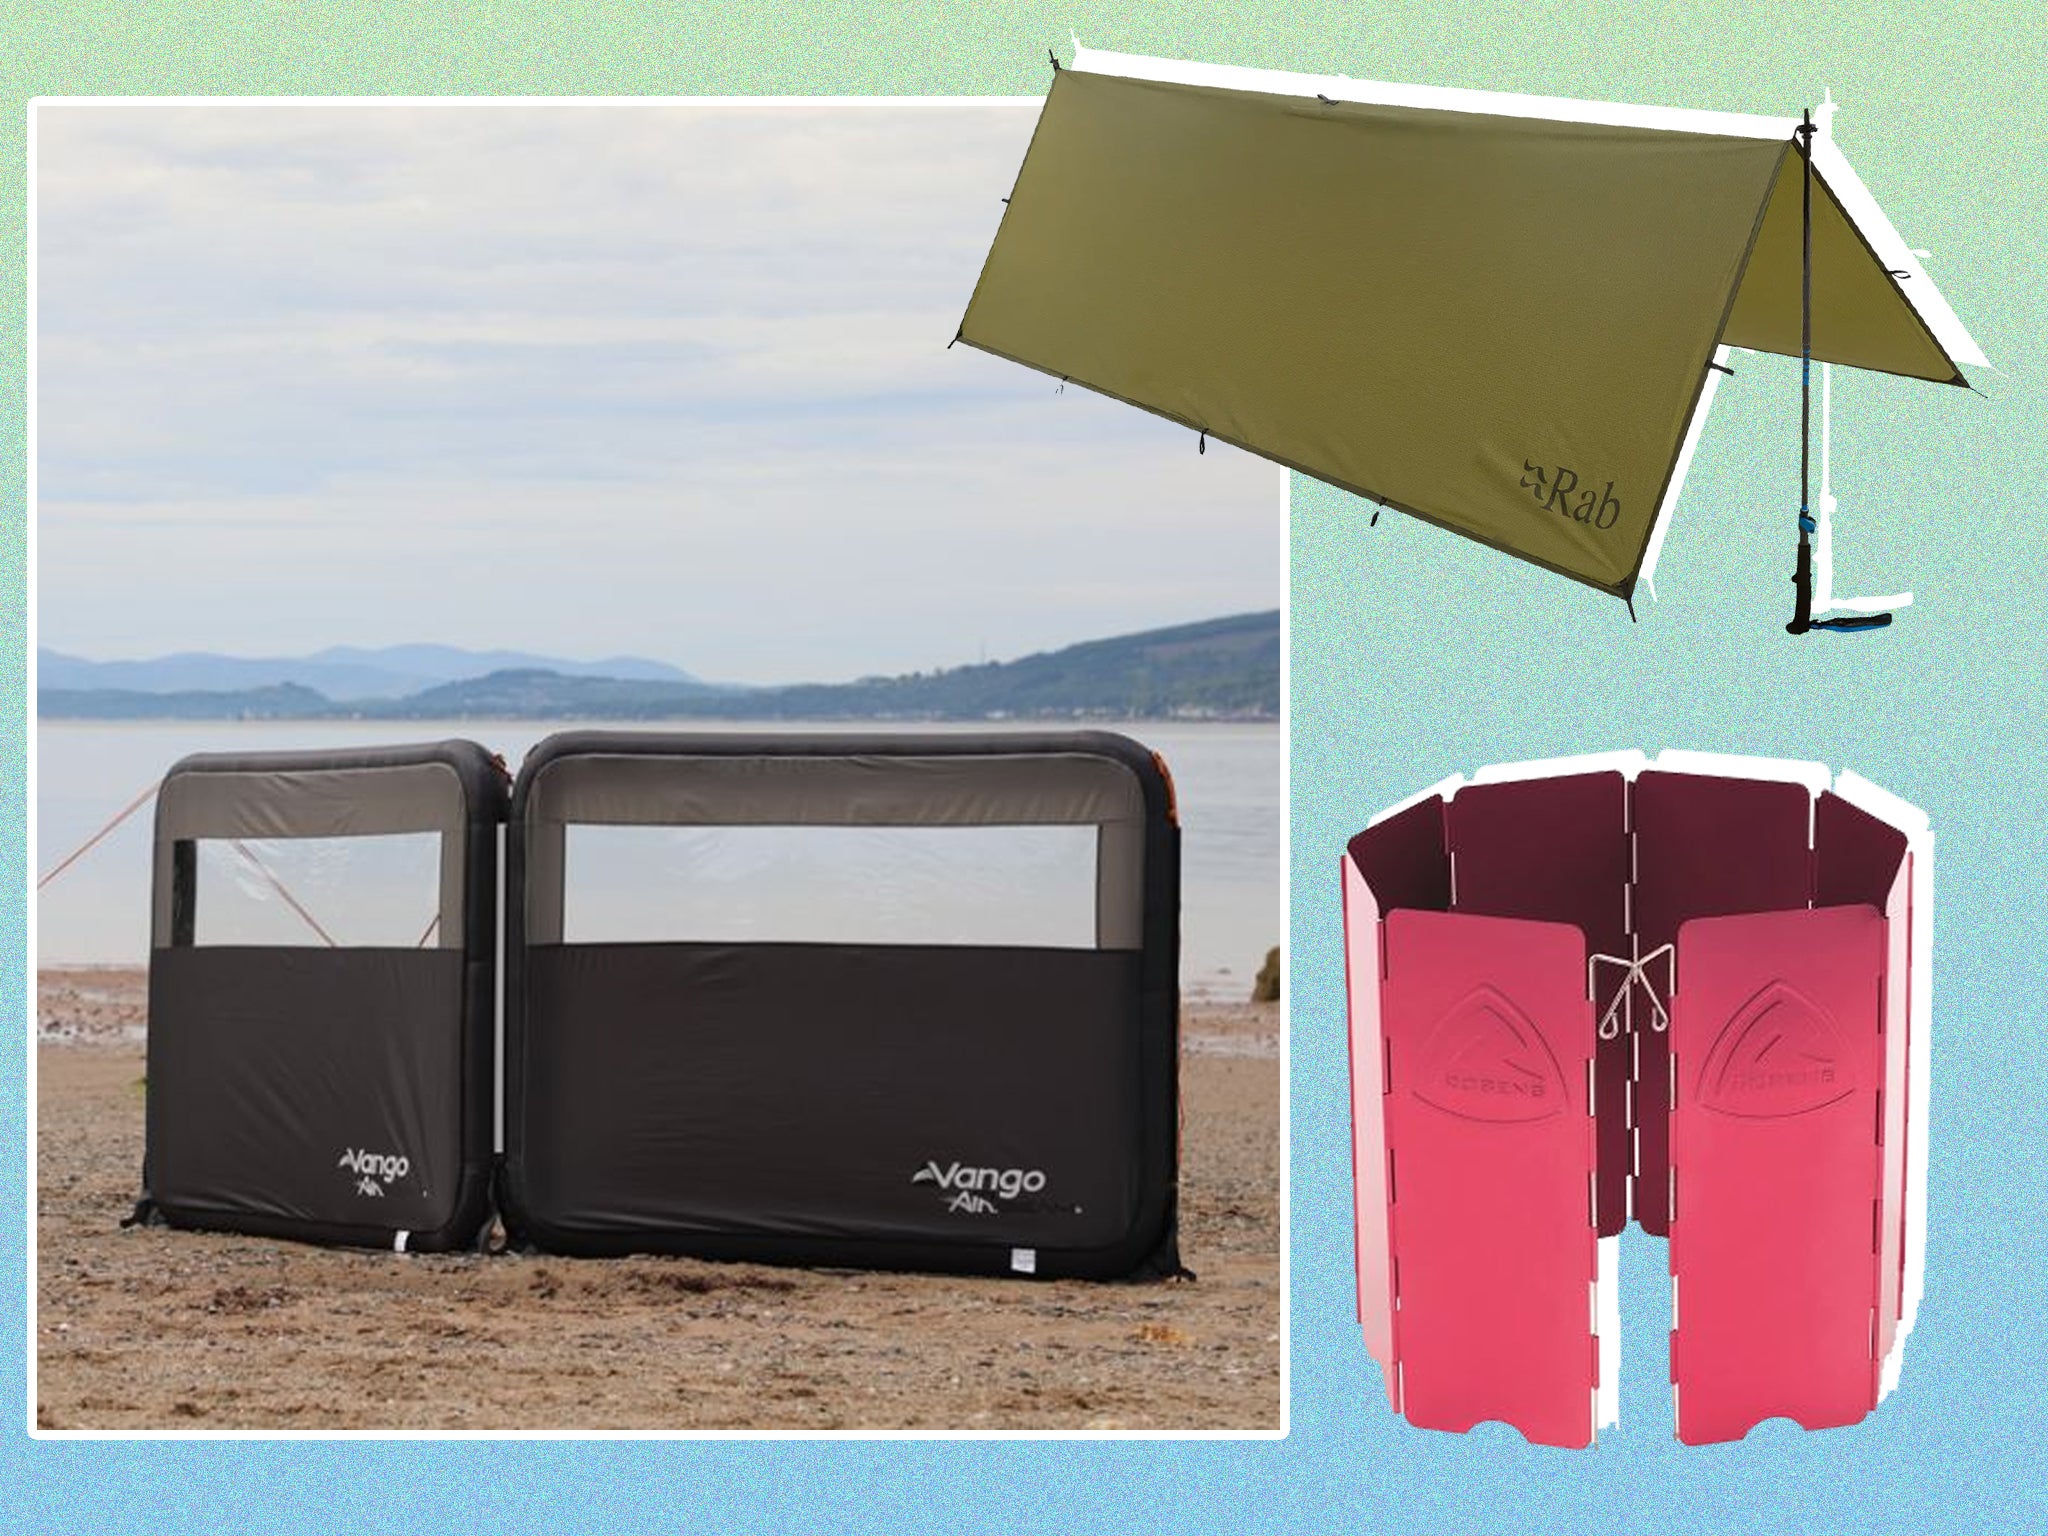 Best windbreaks, tried and tested for camping and beach trips